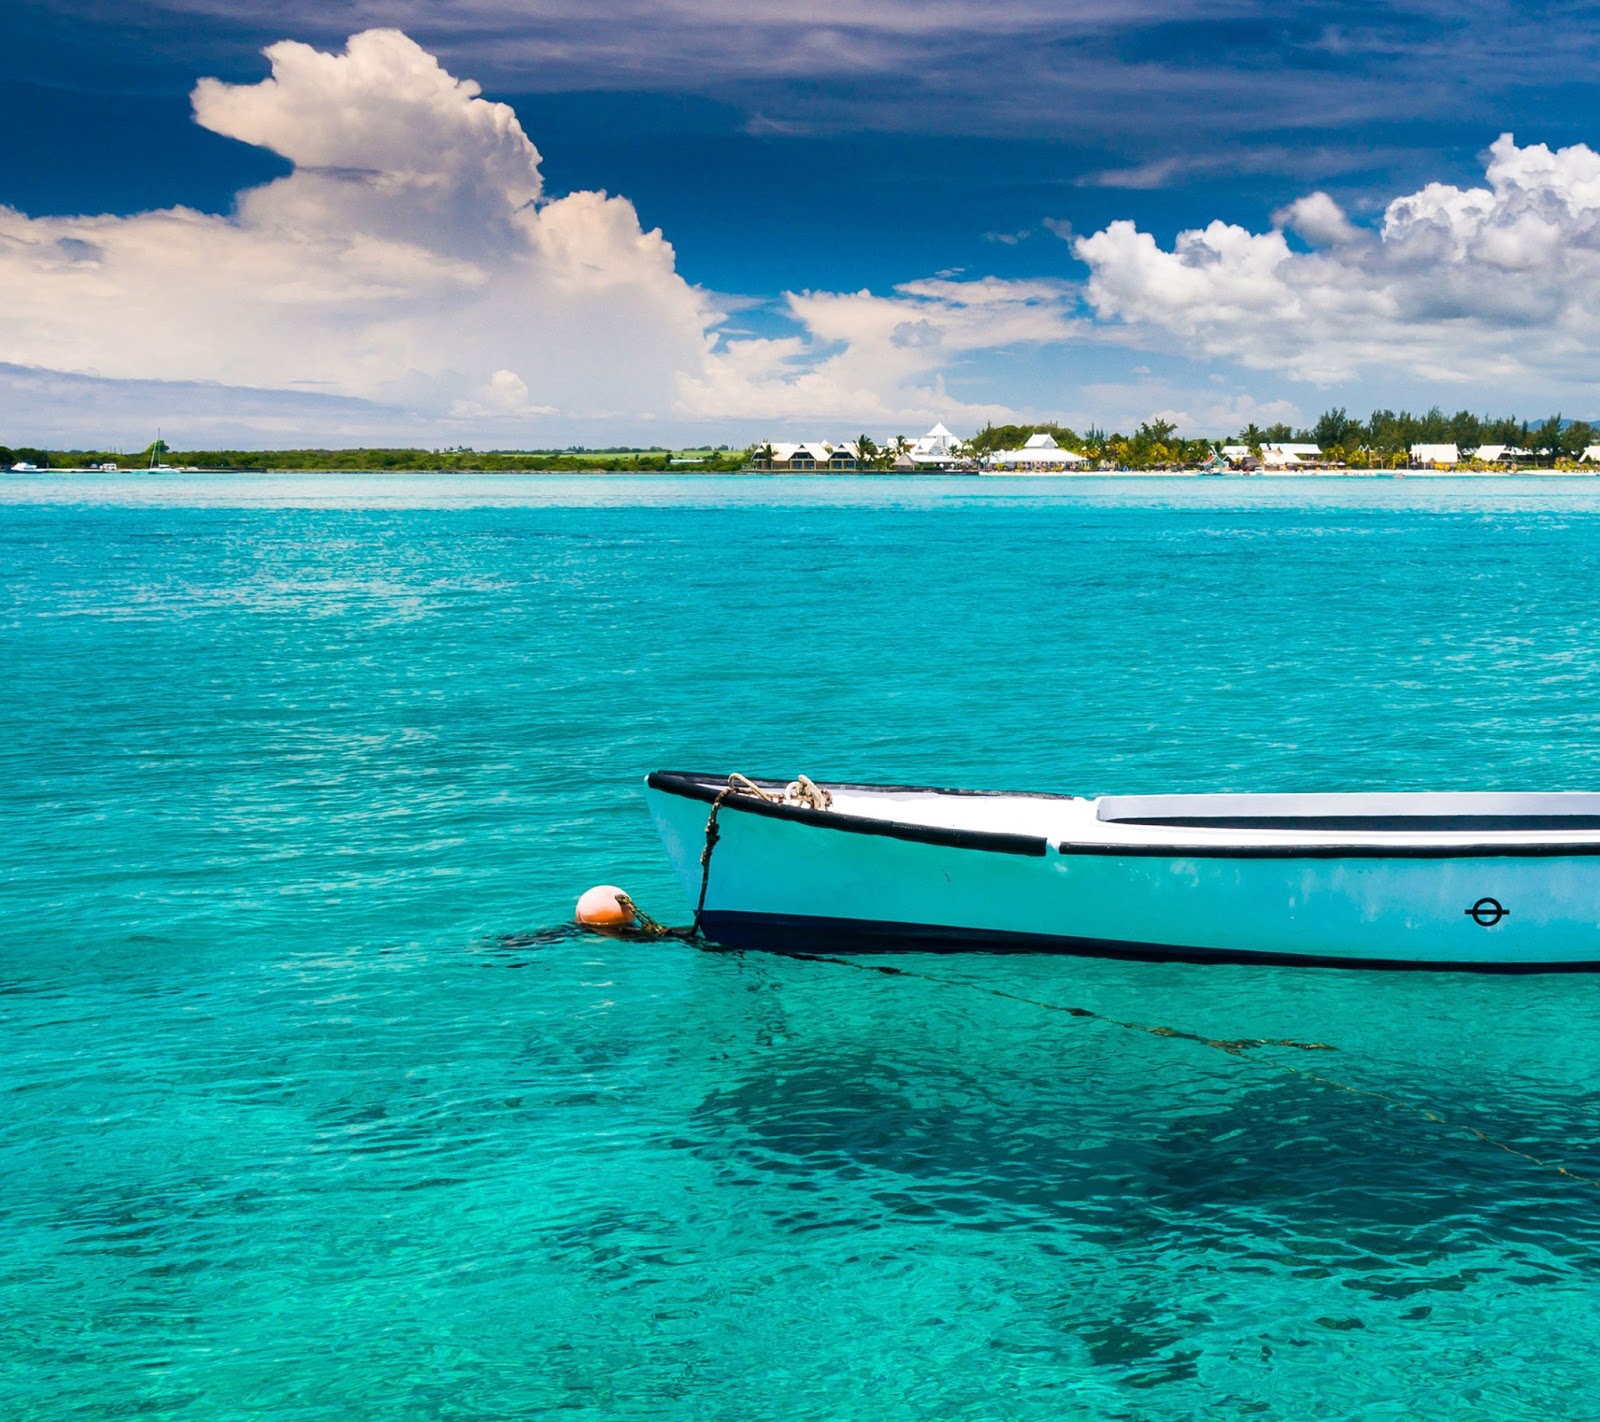 Galaxy S4 Wallpaper - Boat Mauritius - HD Wallpapers - 9to5Wallpapers